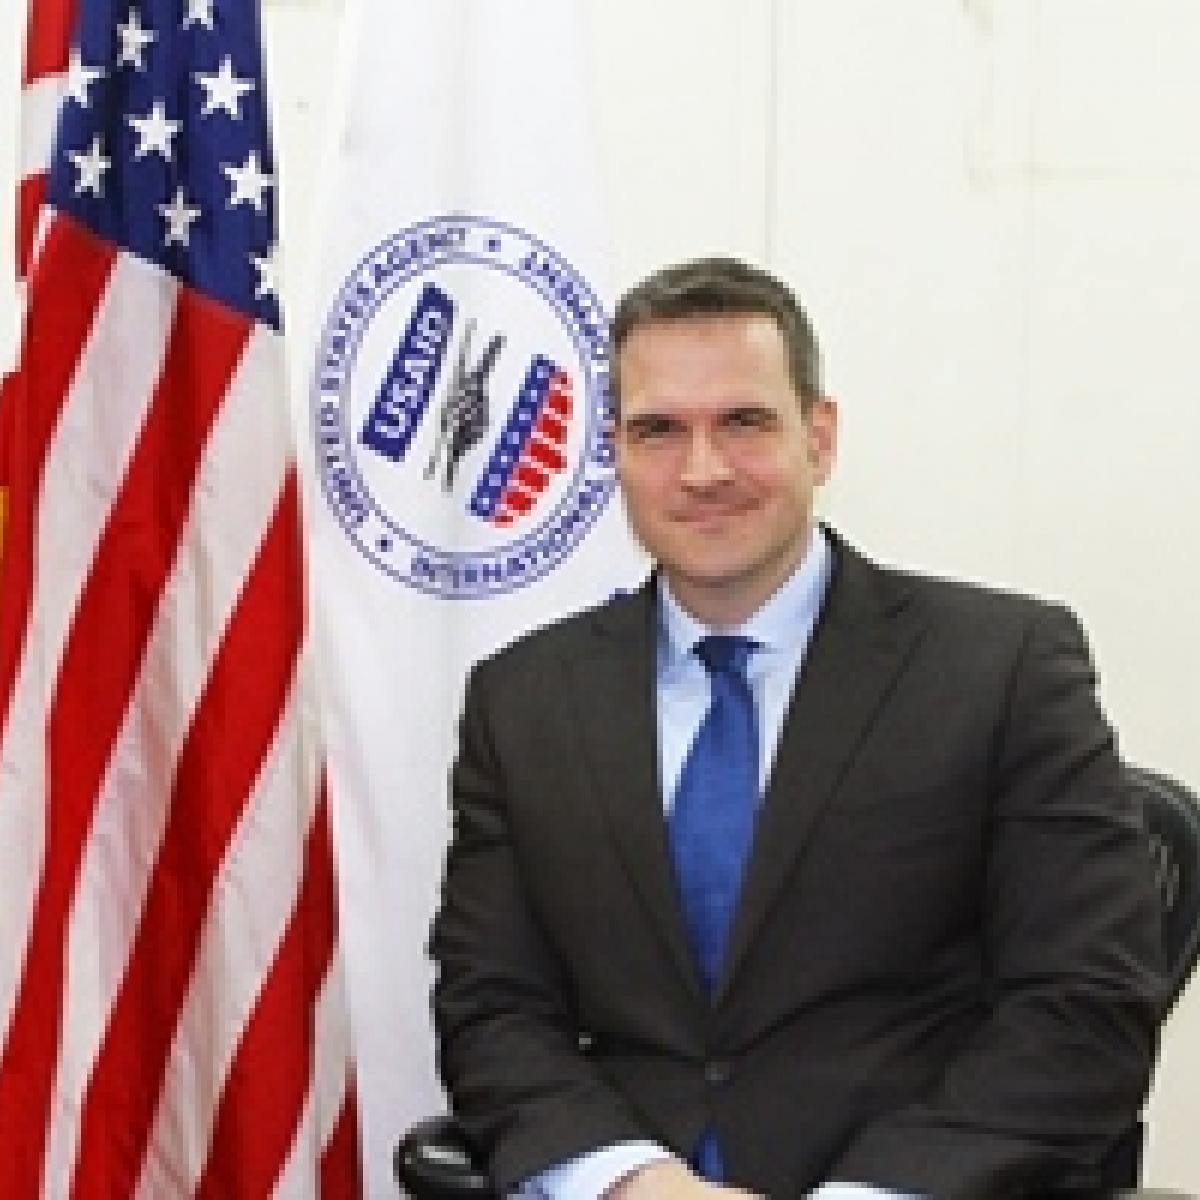 Peter Duffy, Mission Director of USAID/Bosnia and Herzegovina